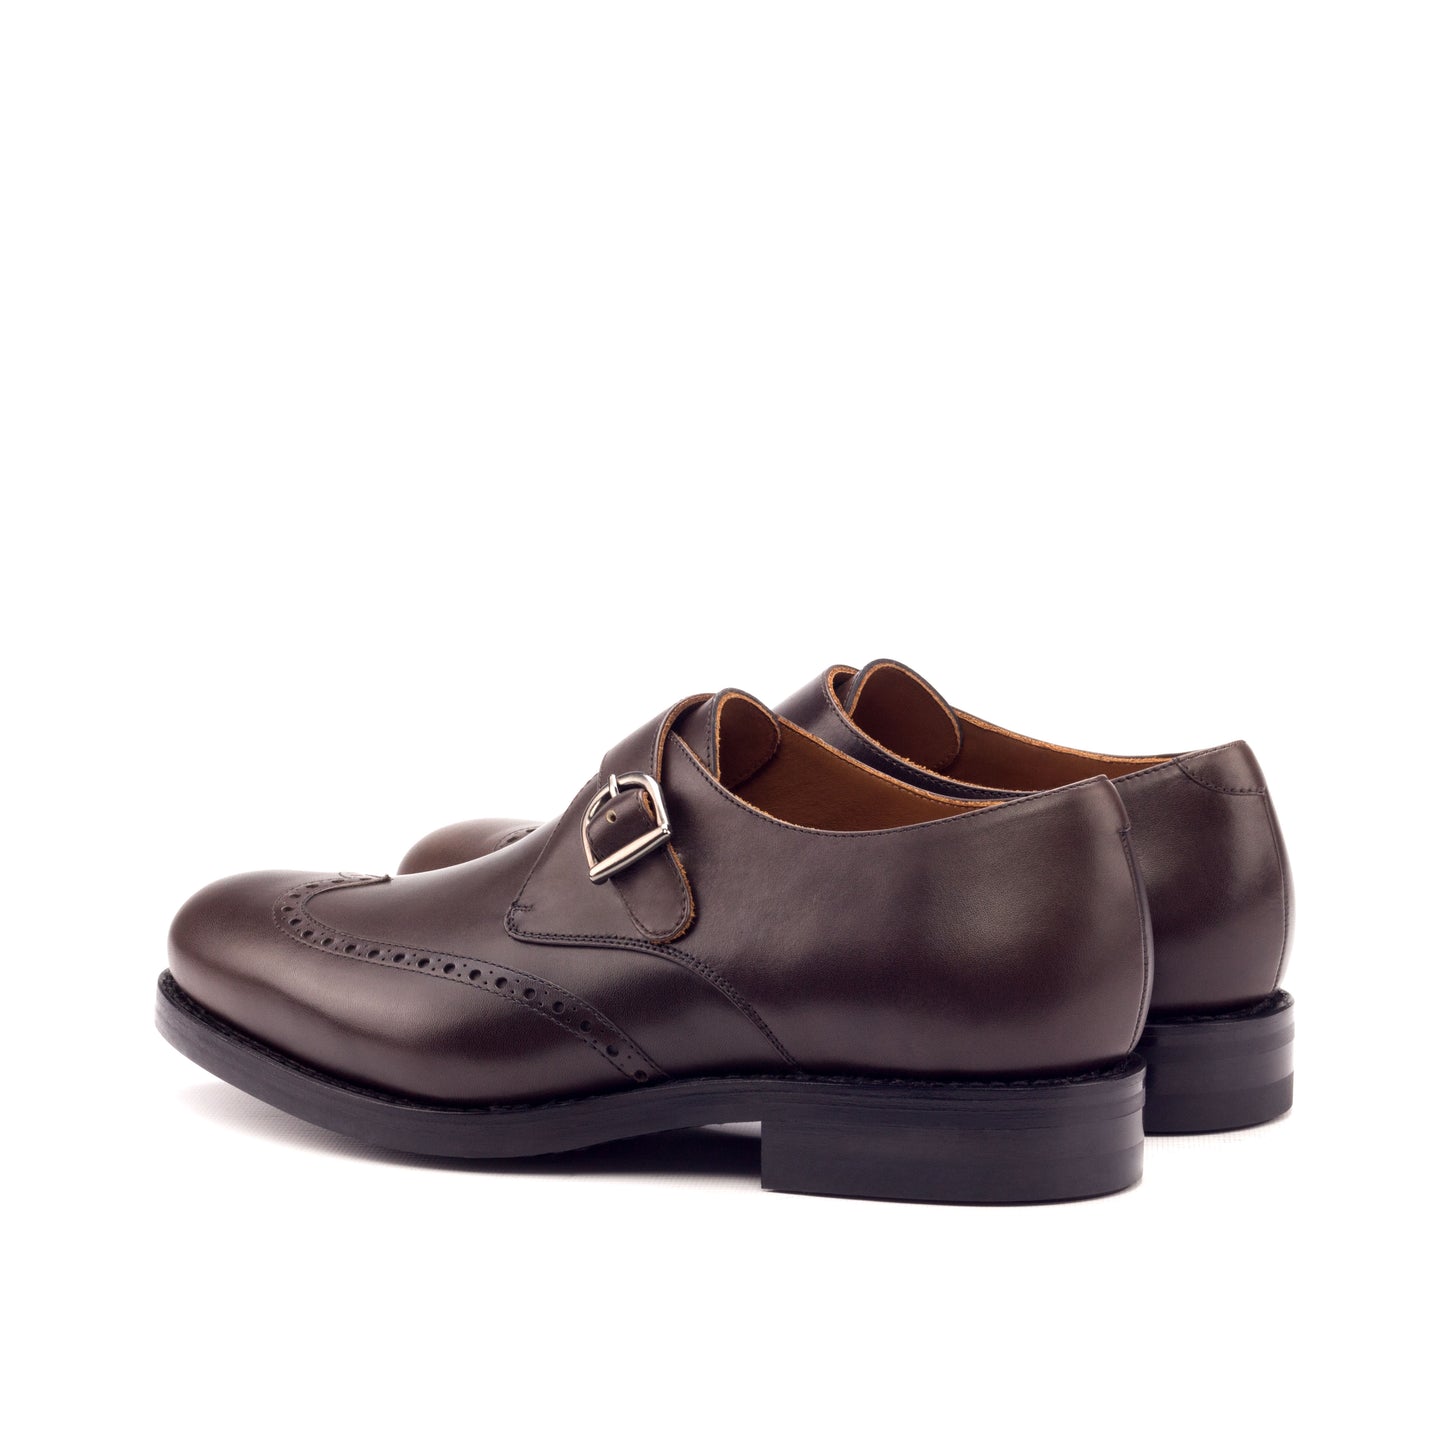 SUITCAFE Single Monk Strap Brown Leather Goodyear Welted Men's Shoe